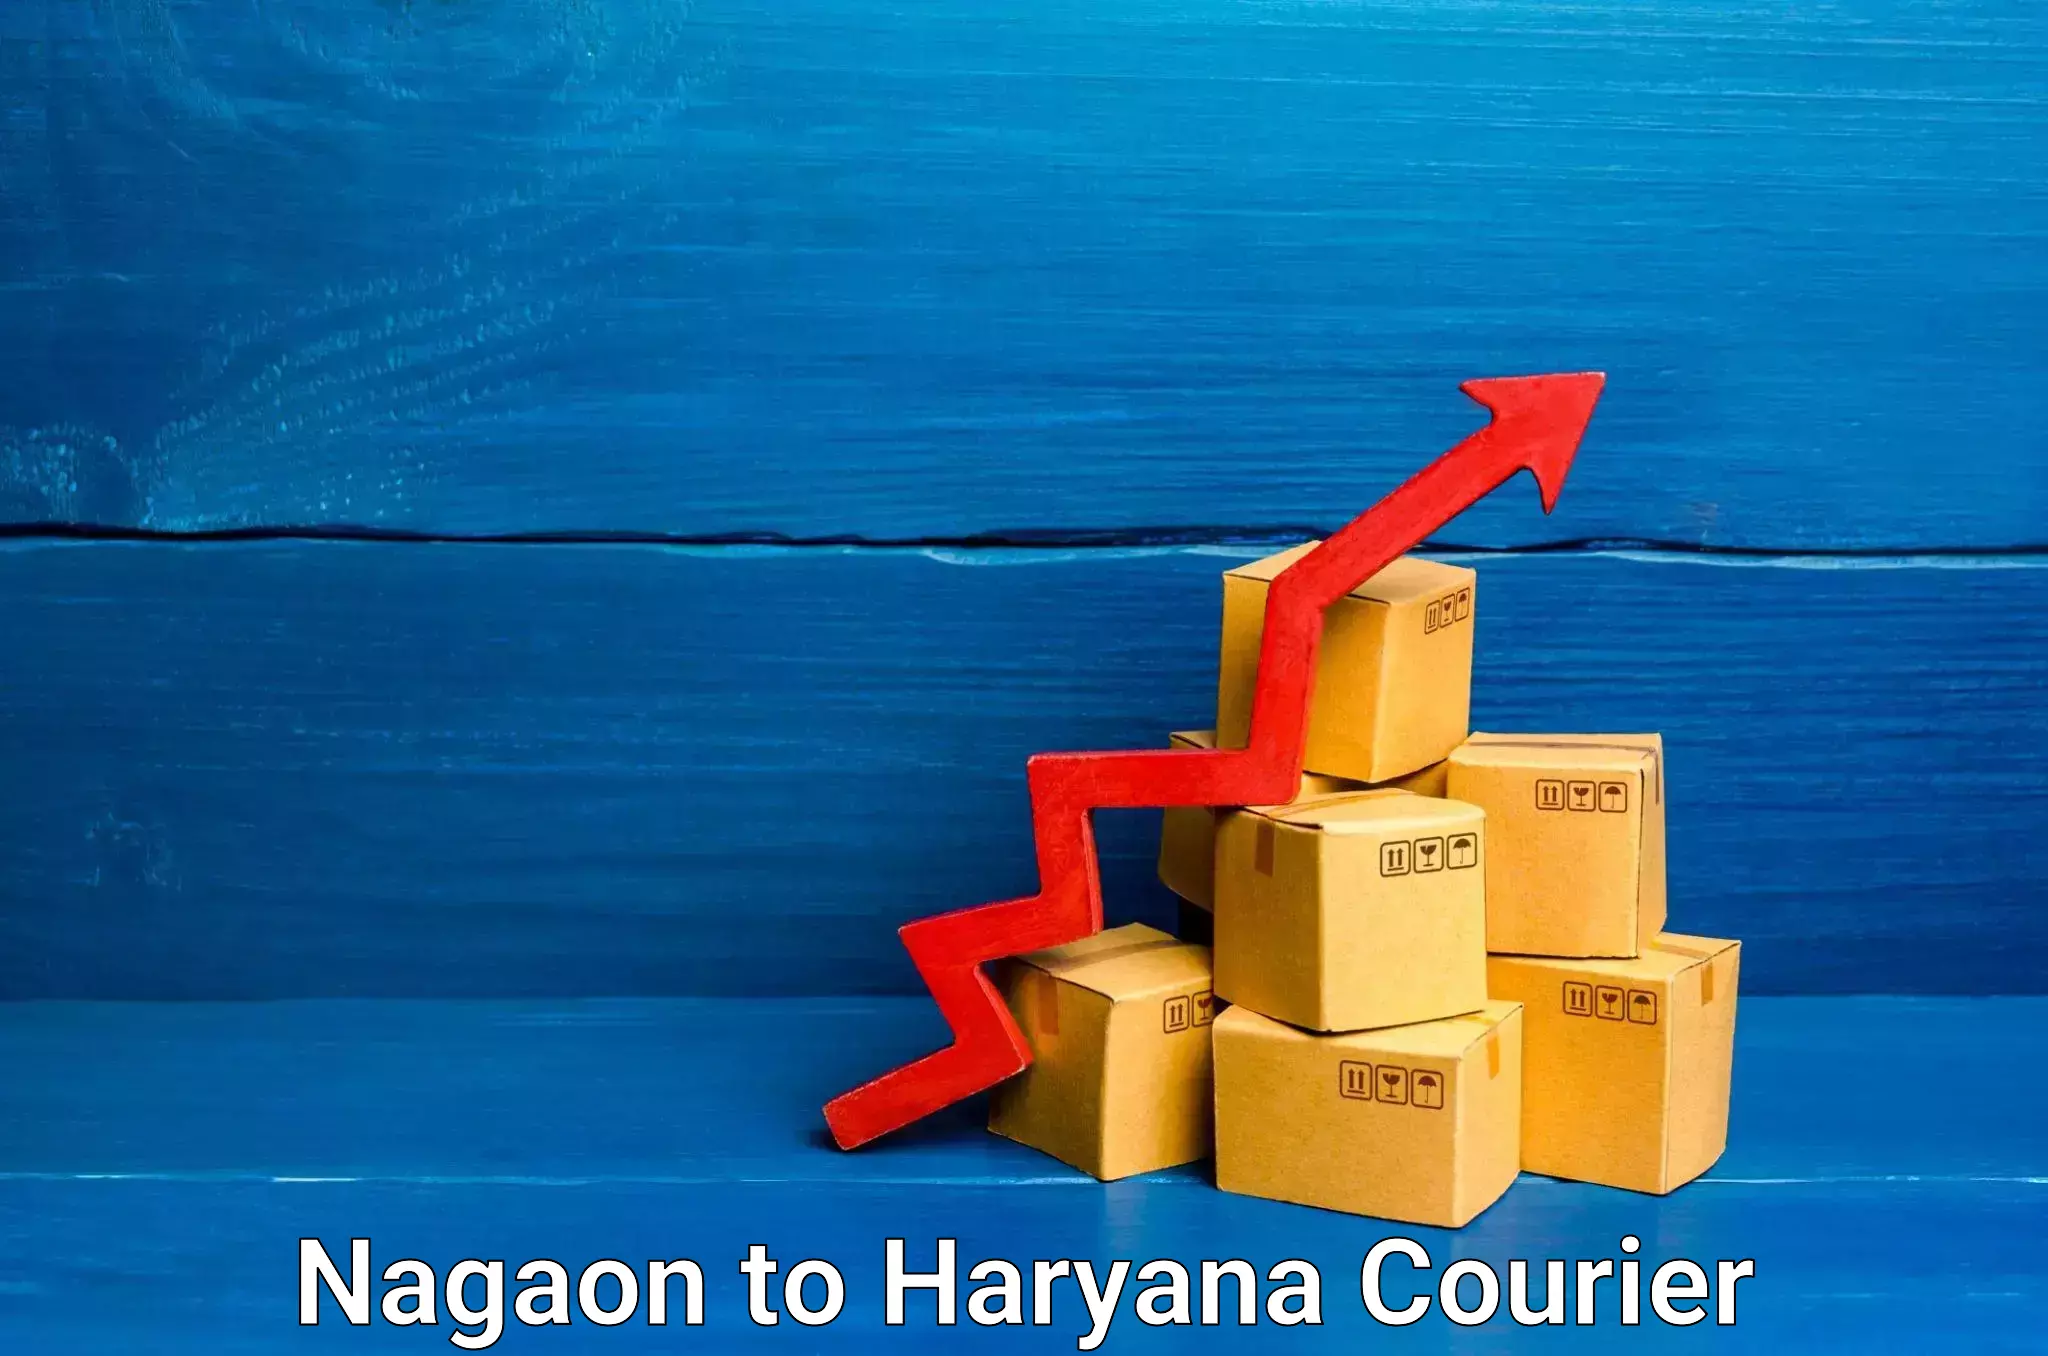 International courier networks Nagaon to Panipat